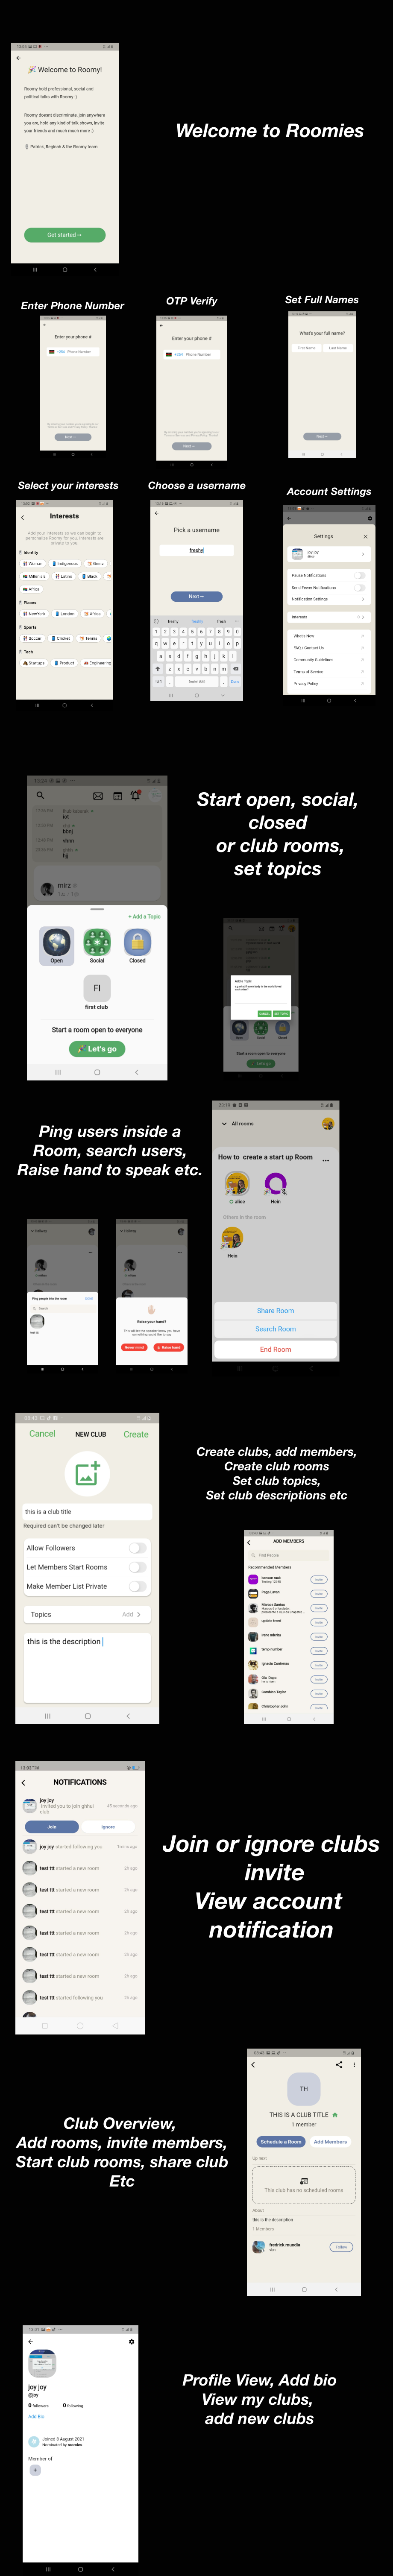 Roomies - Clubhouse Clone and Social Audio App - 2